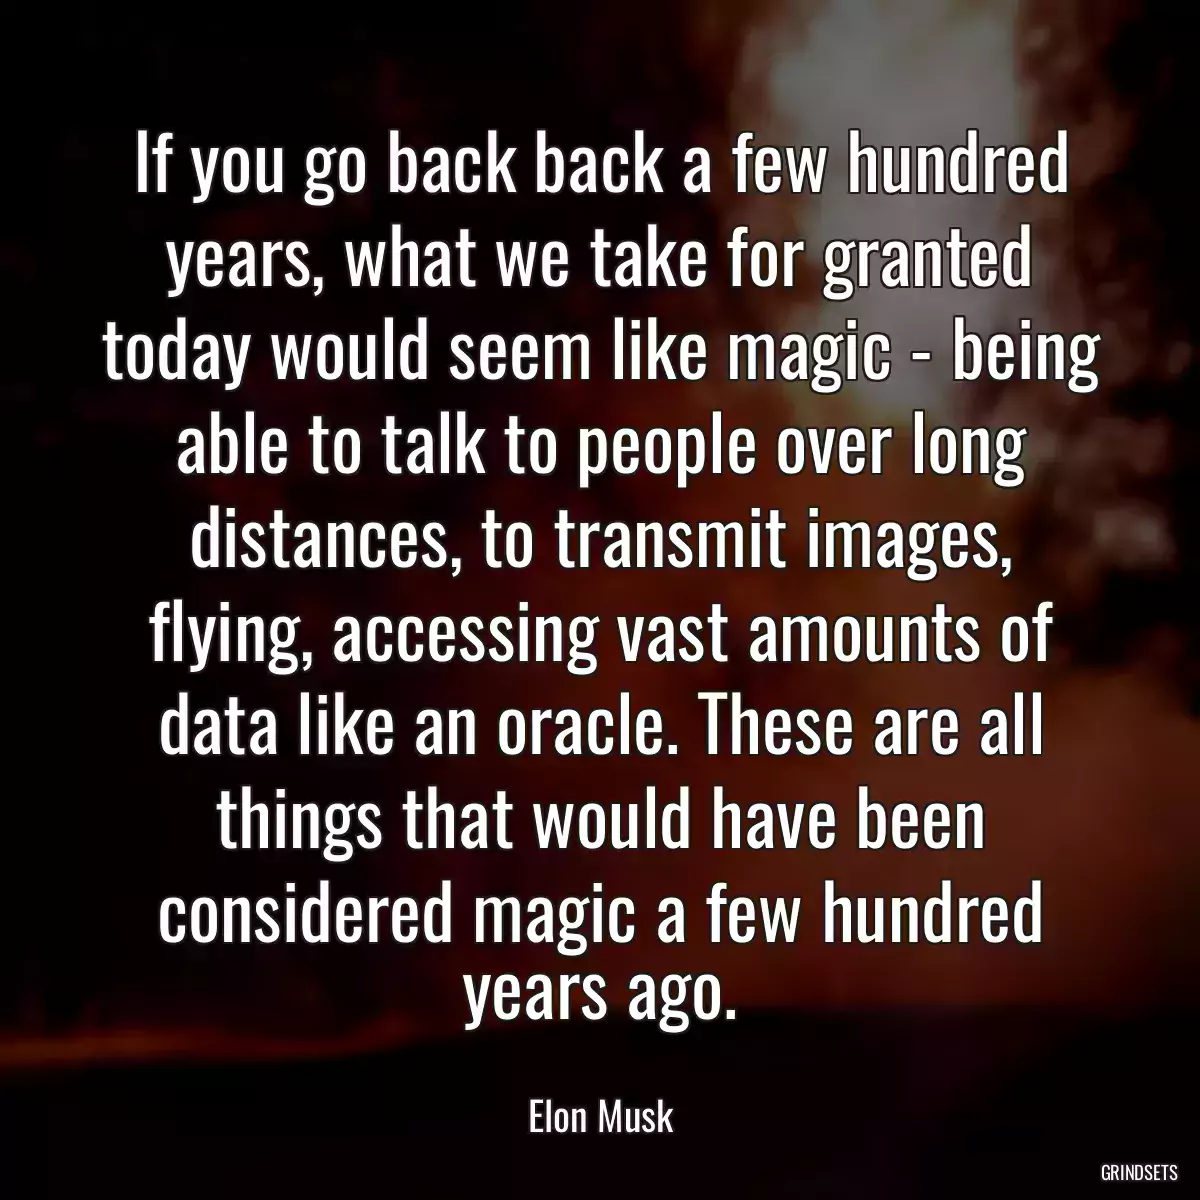 If you go back back a few hundred years, what we take for granted today would seem like magic - being able to talk to people over long distances, to transmit images, flying, accessing vast amounts of data like an oracle. These are all things that would have been considered magic a few hundred years ago.